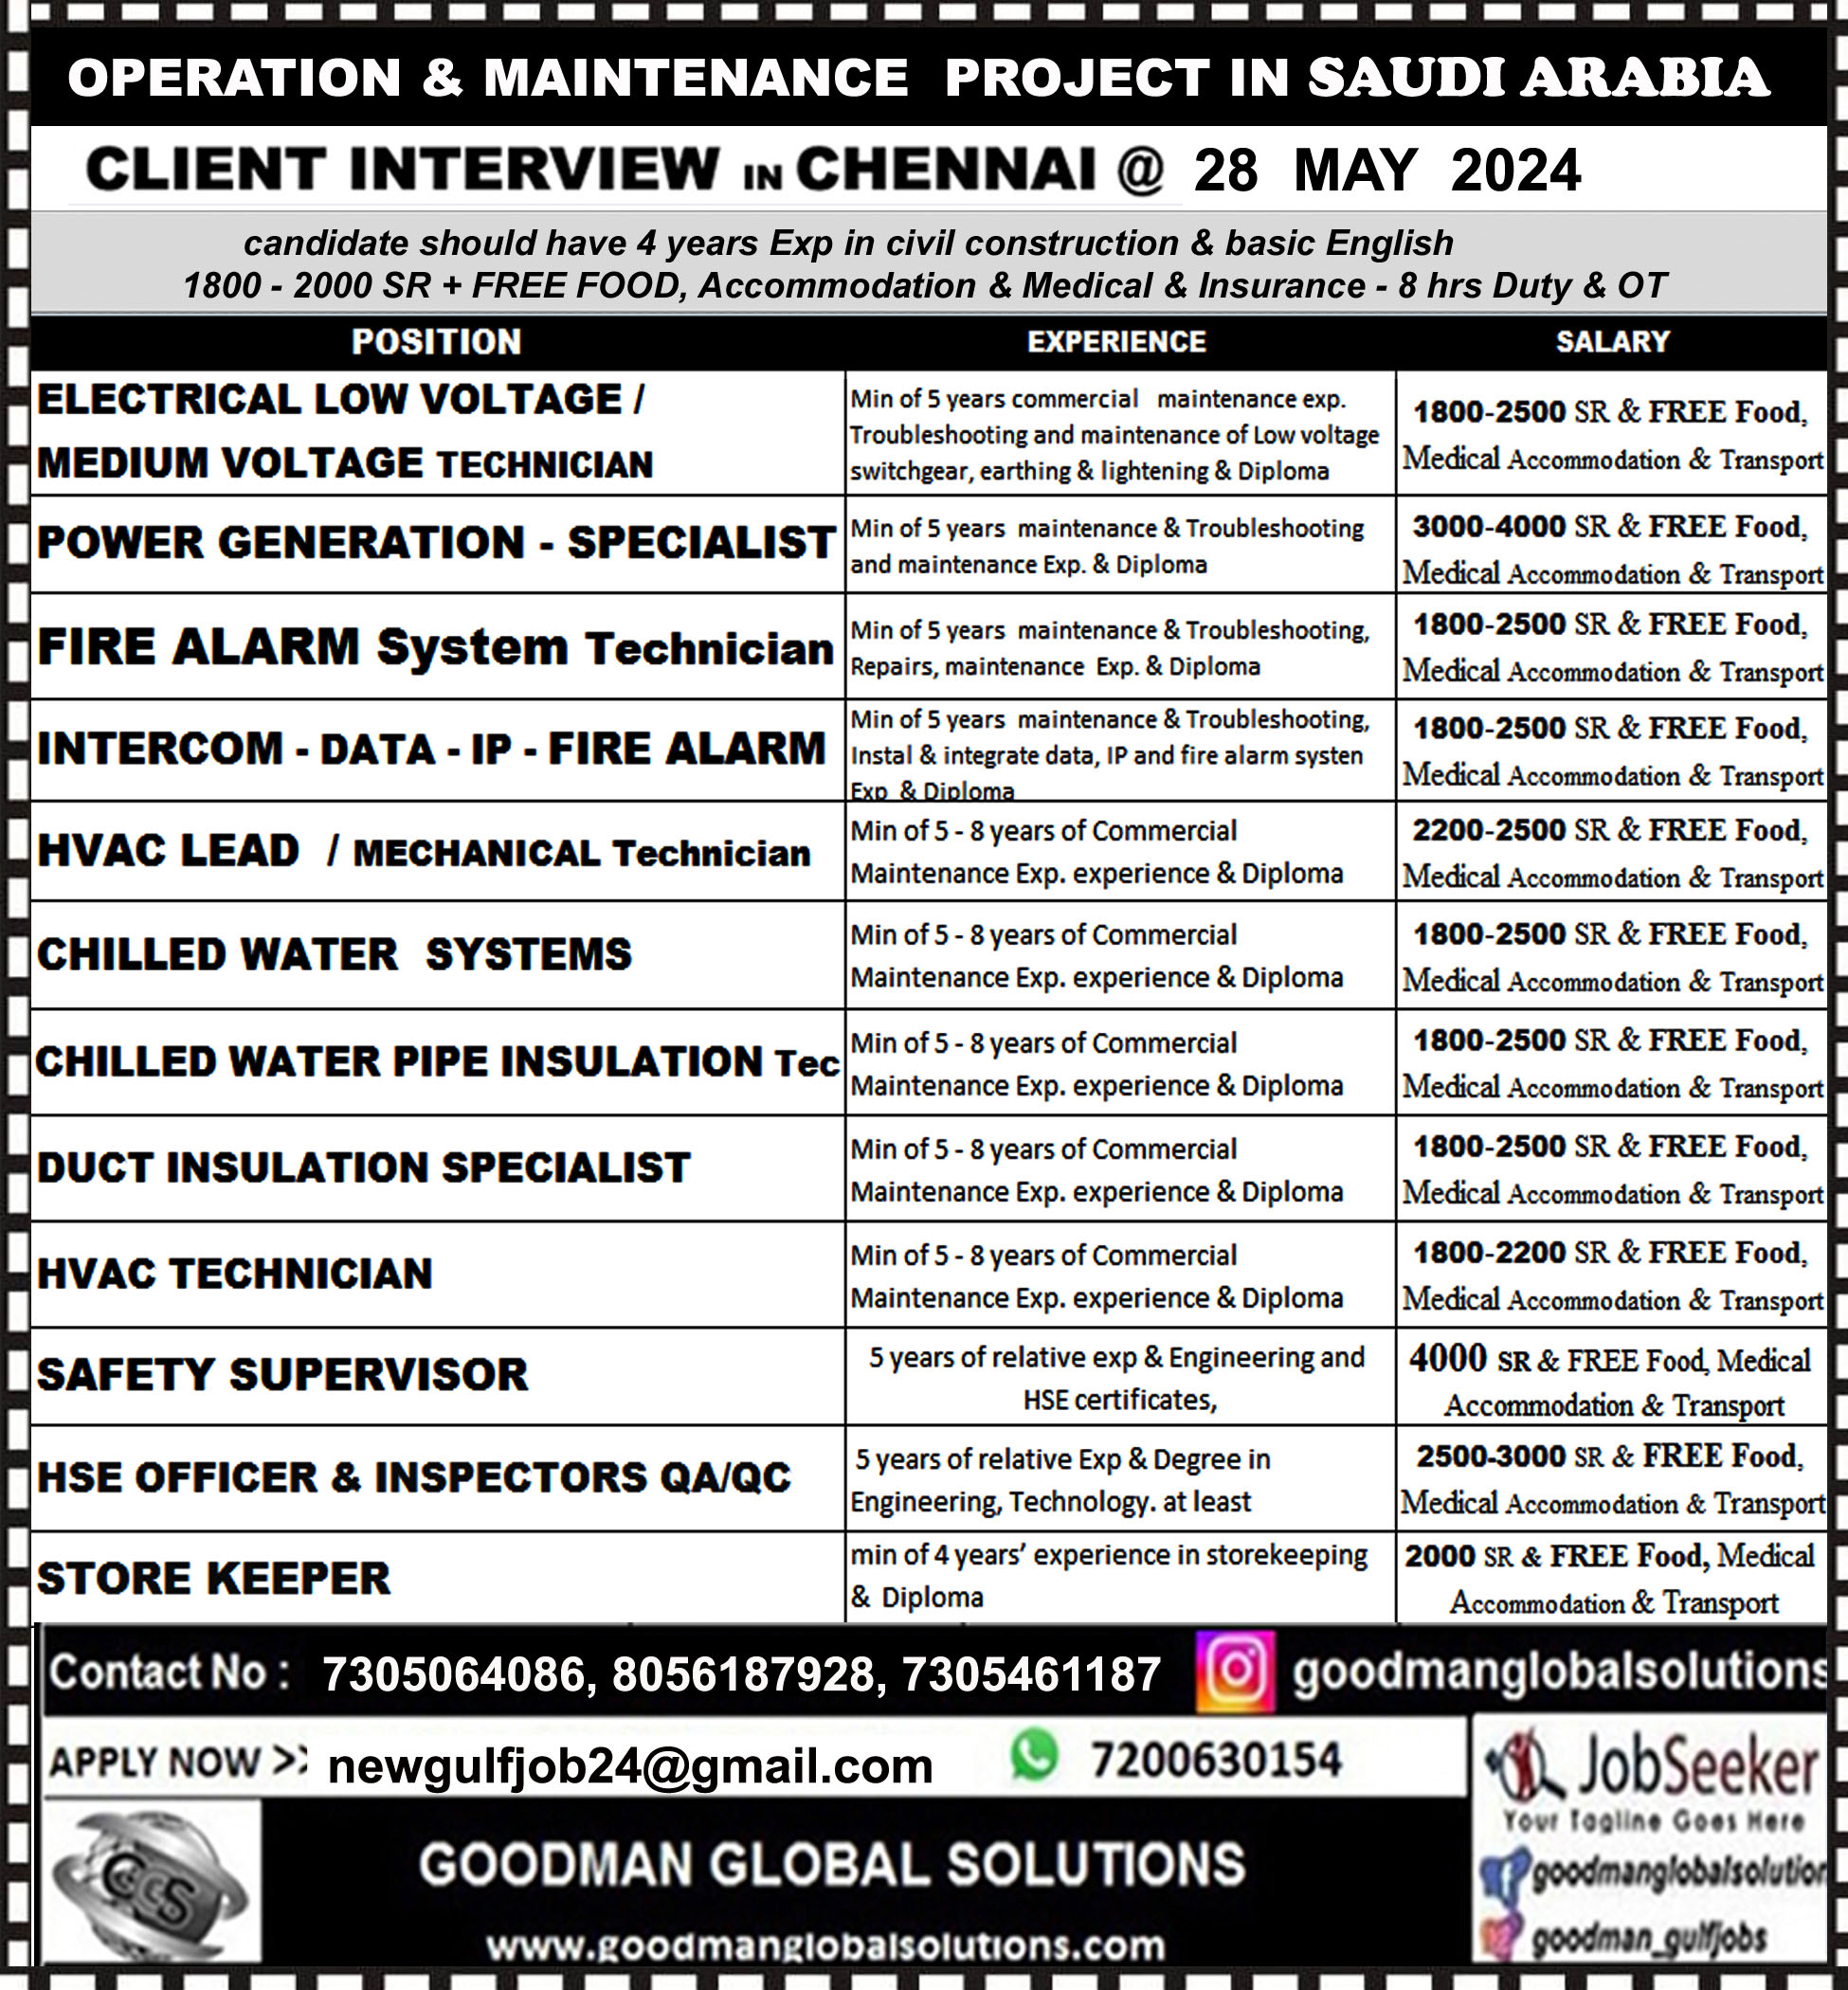 OPERATION & MAINTENANCE PROJECT IN SAUDI ARABIA Client interview in Chennai @ 28 MAY 2024